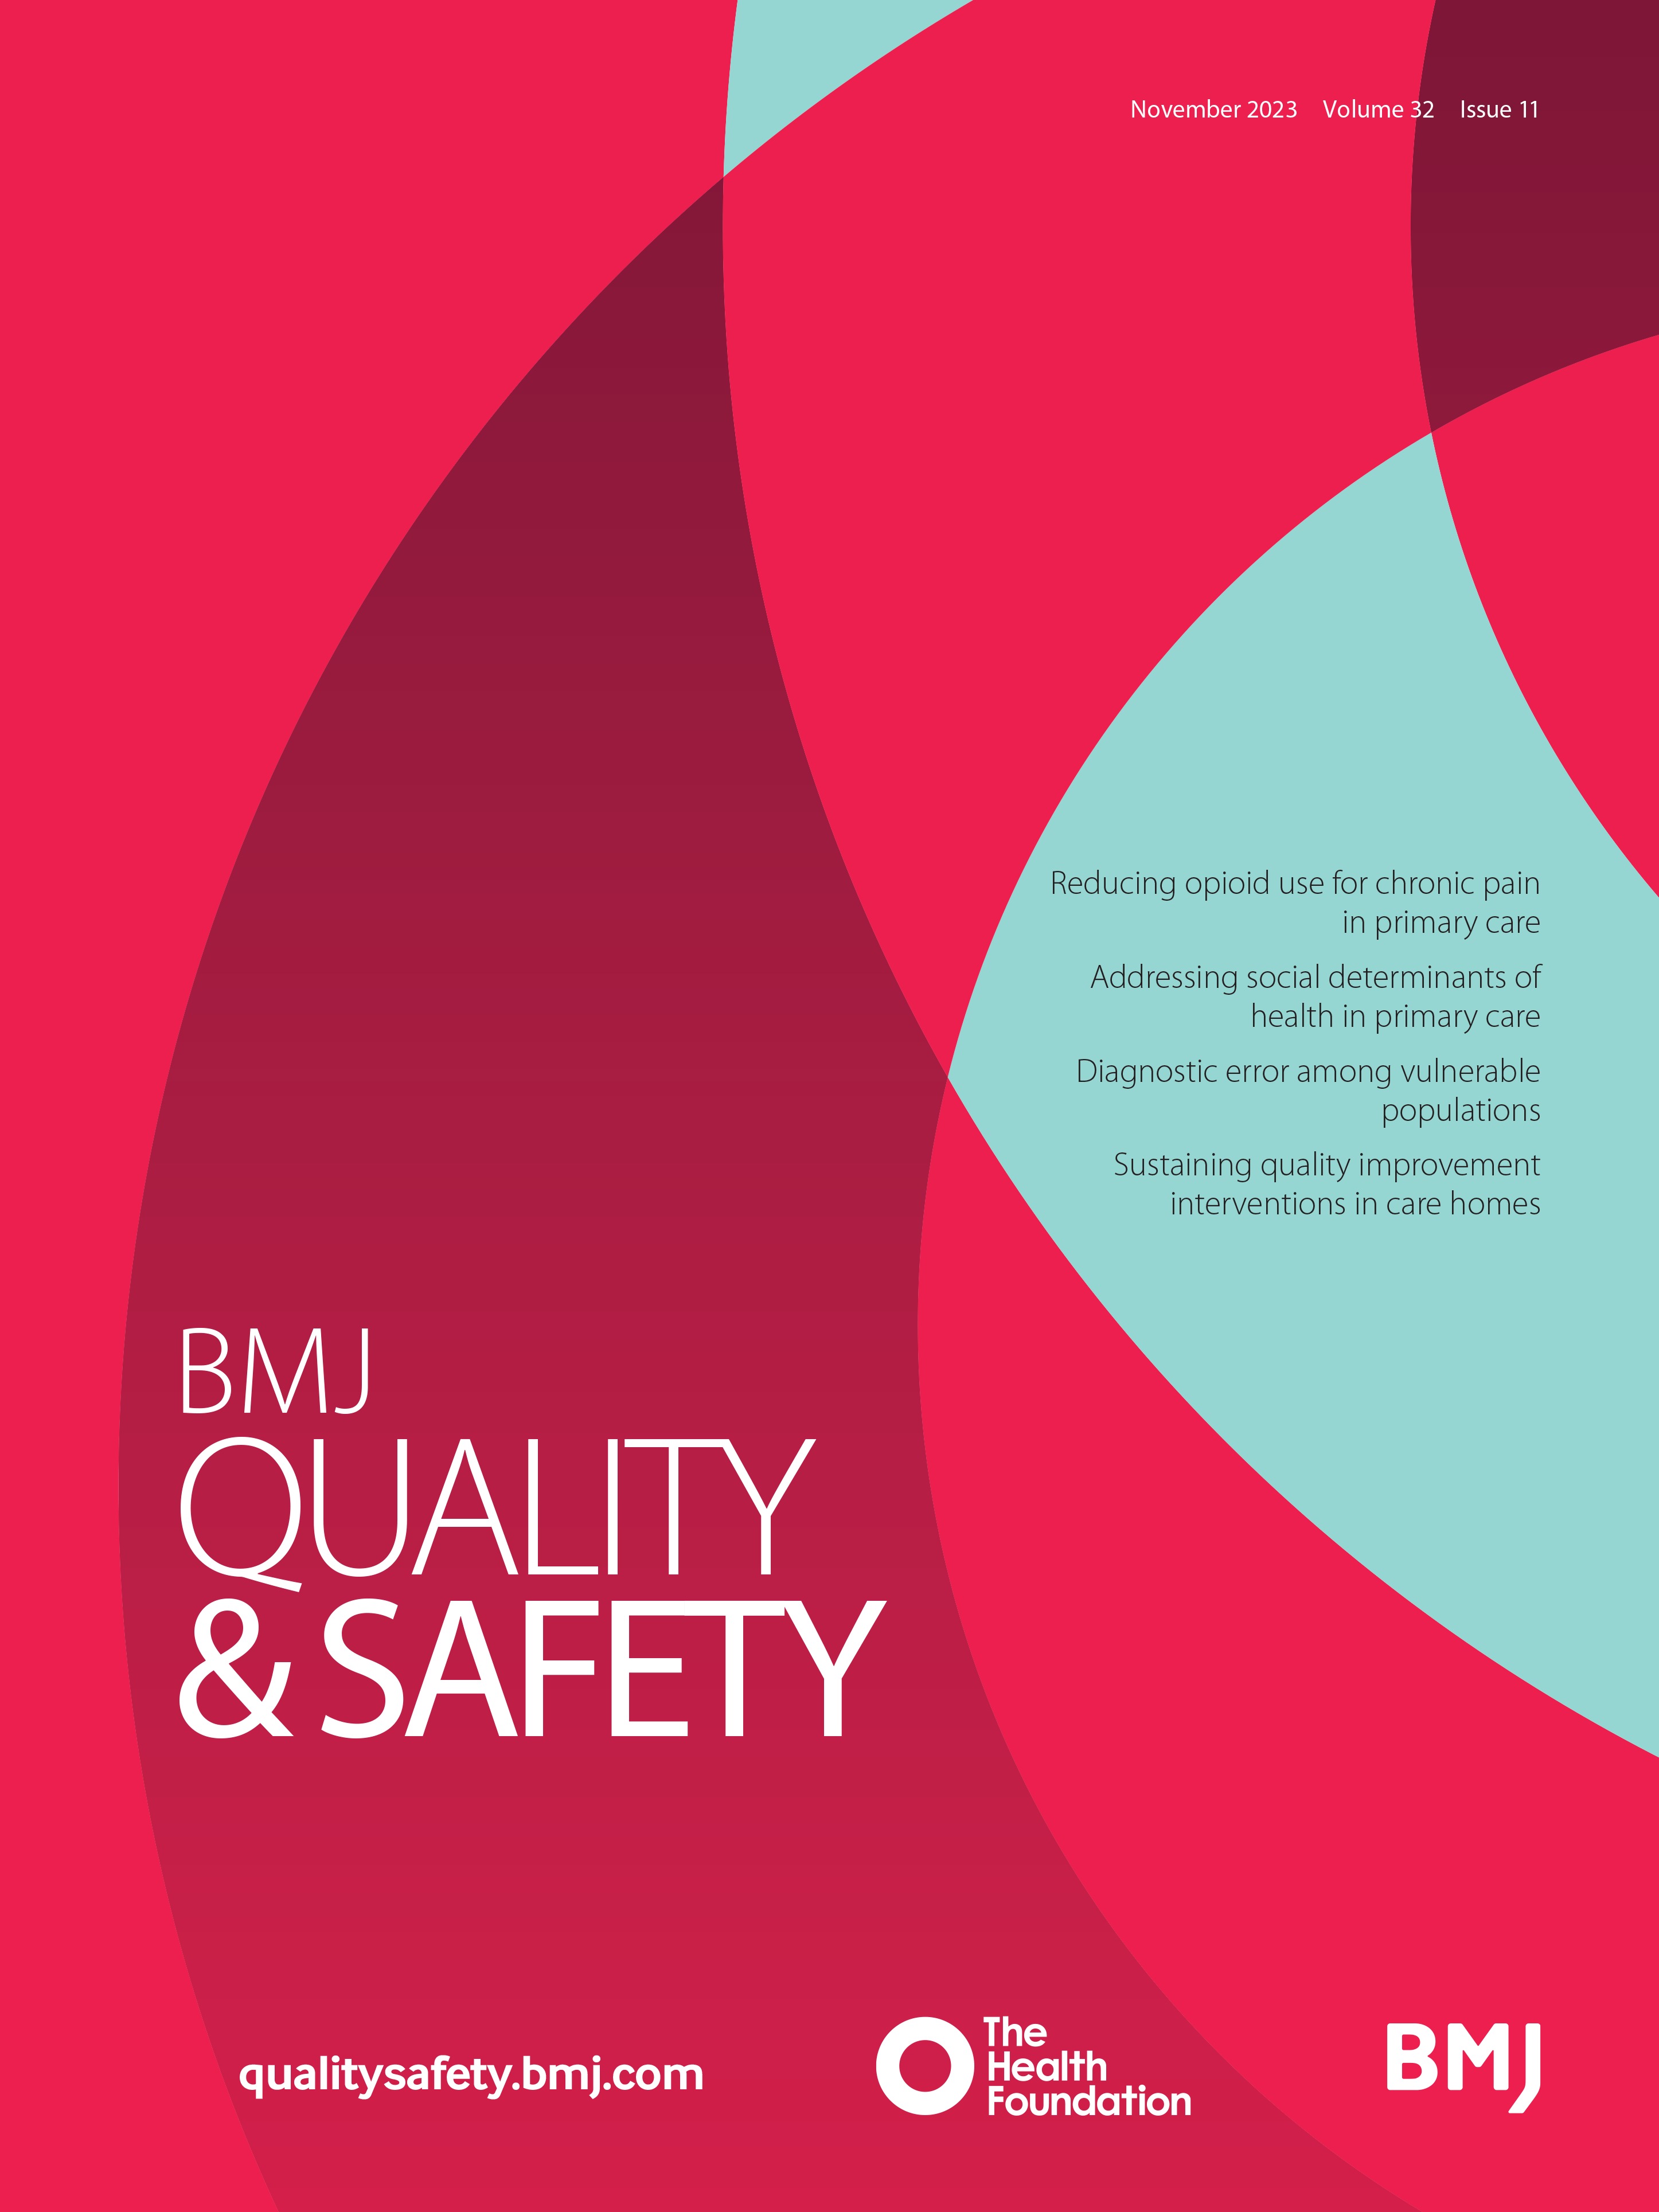 Addressing social determinants of health in primary care: a quasi-experimental study using unannounced standardised patients to evaluate the impact of audit/feedback on physicians' rates of identifying and responding to social needs